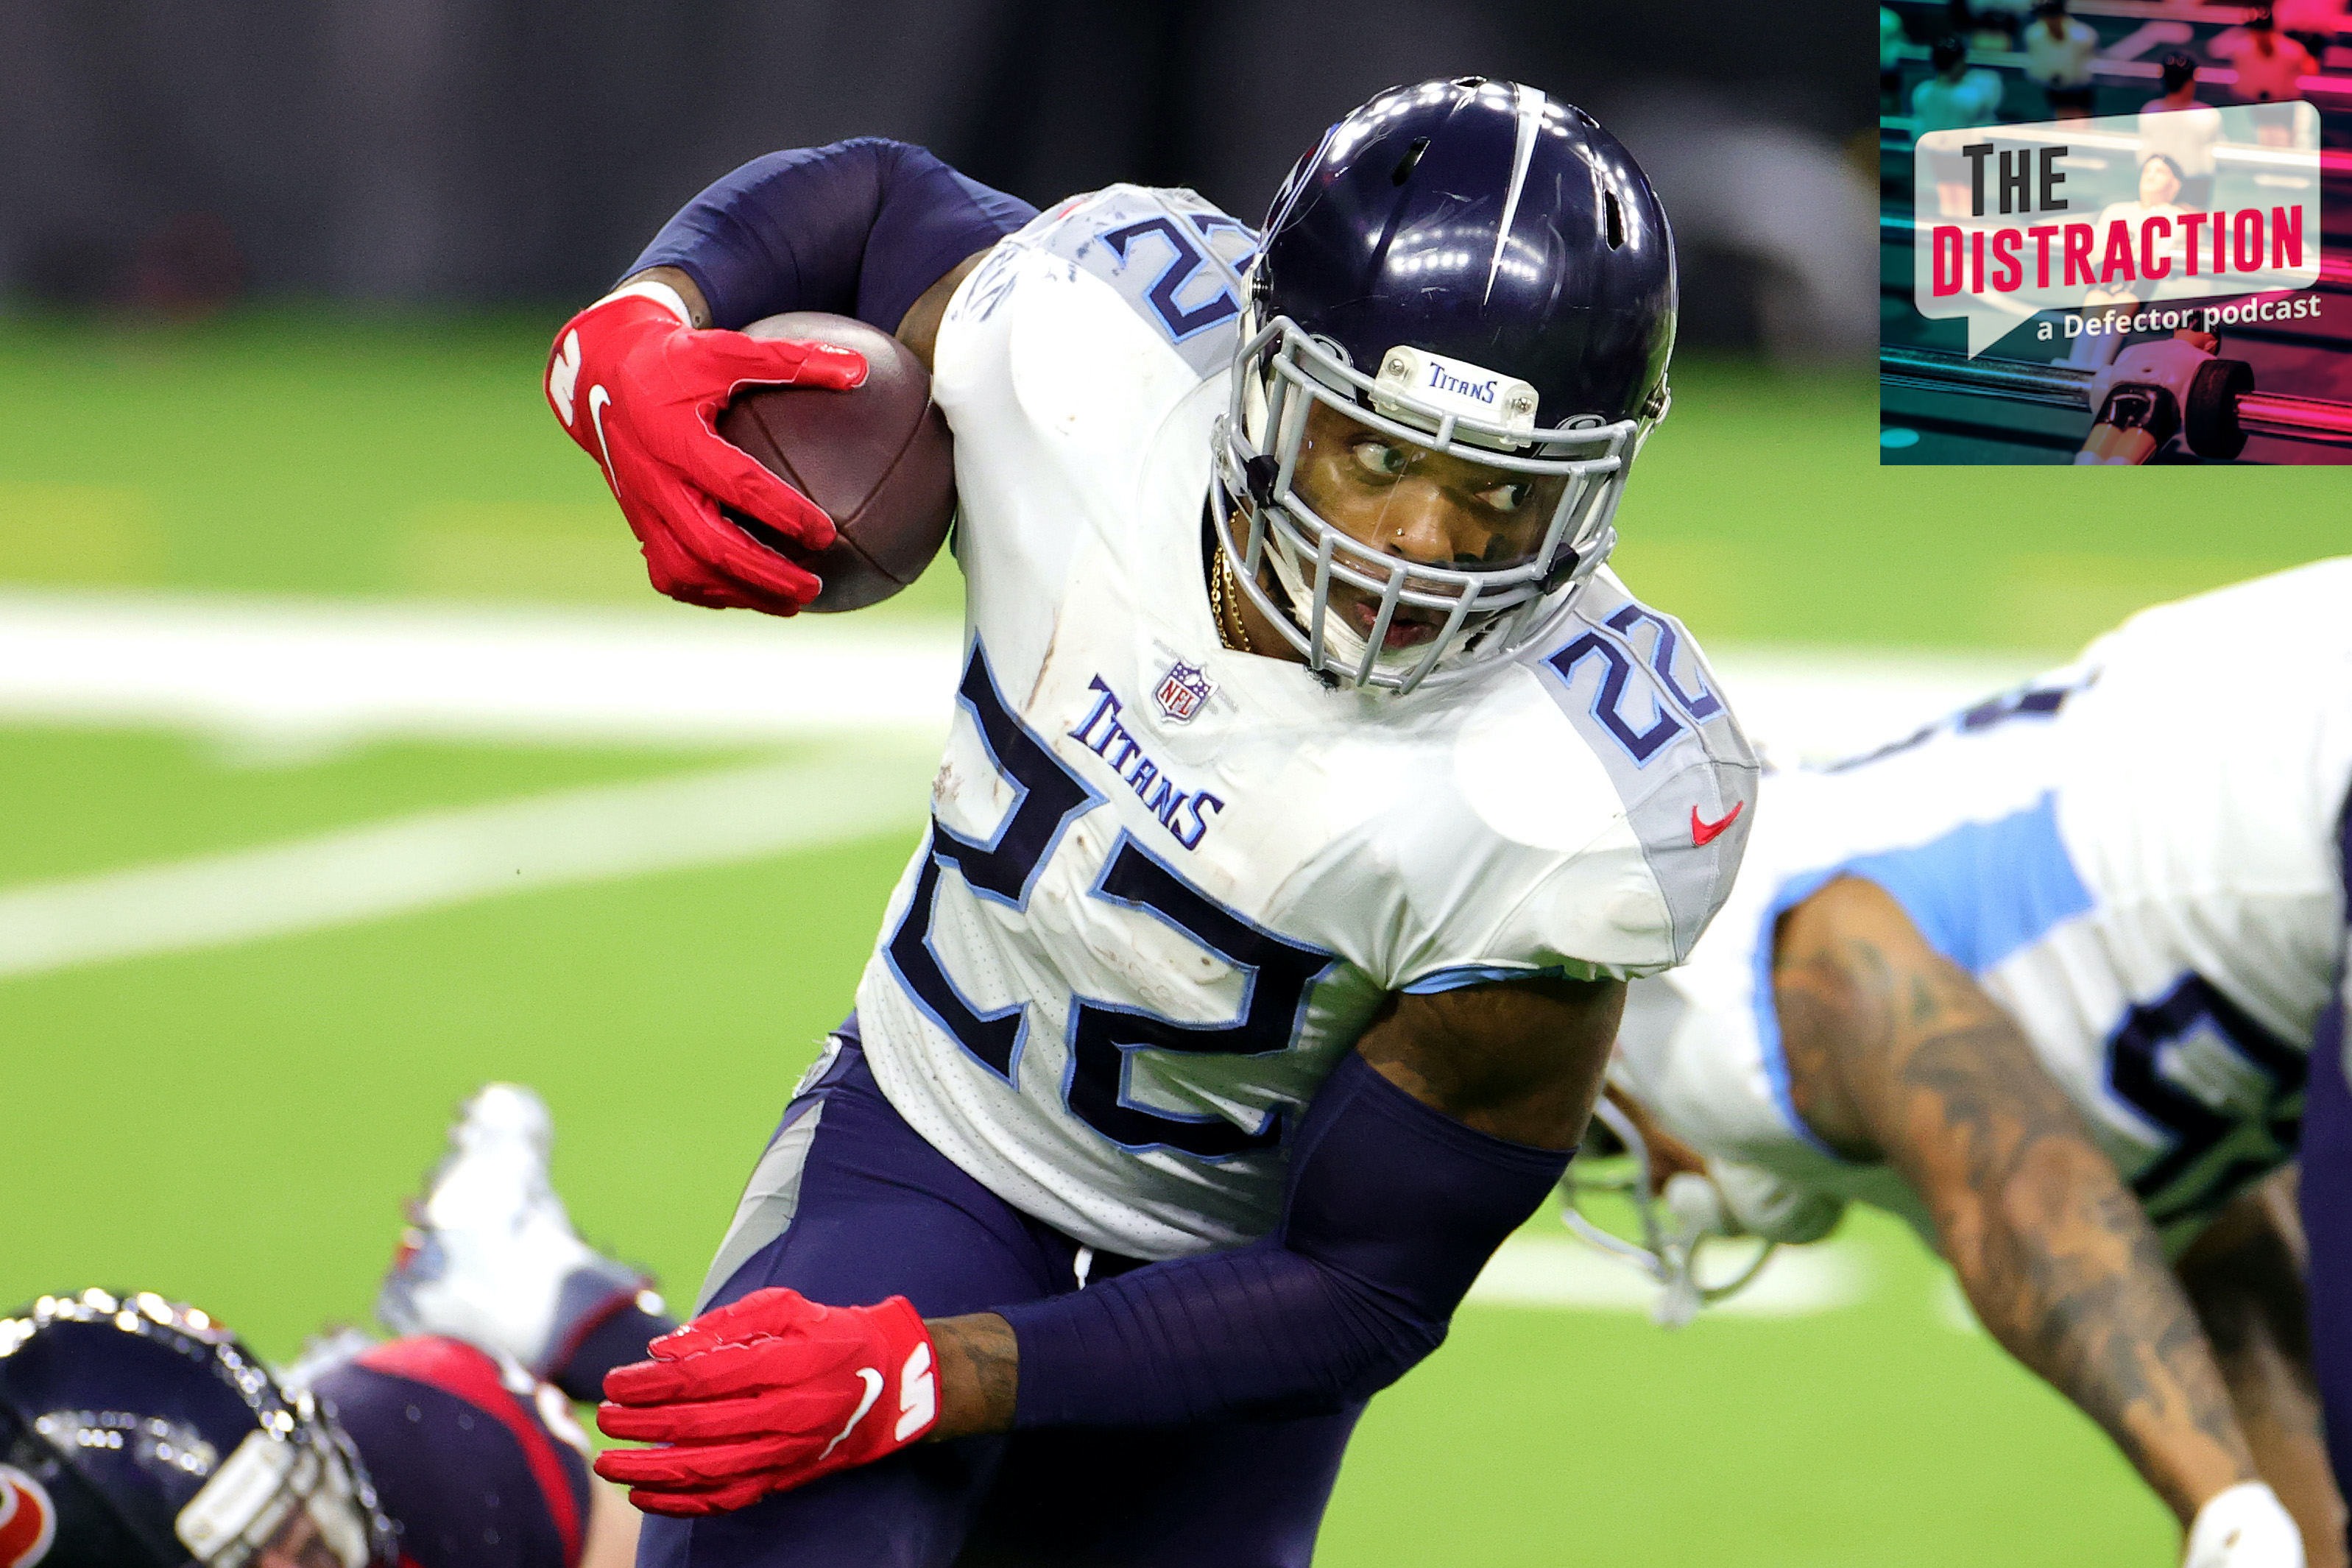 Tennessee Titans star Derrick Henry rushes against the Houston Texans at the end of the last NFL season.